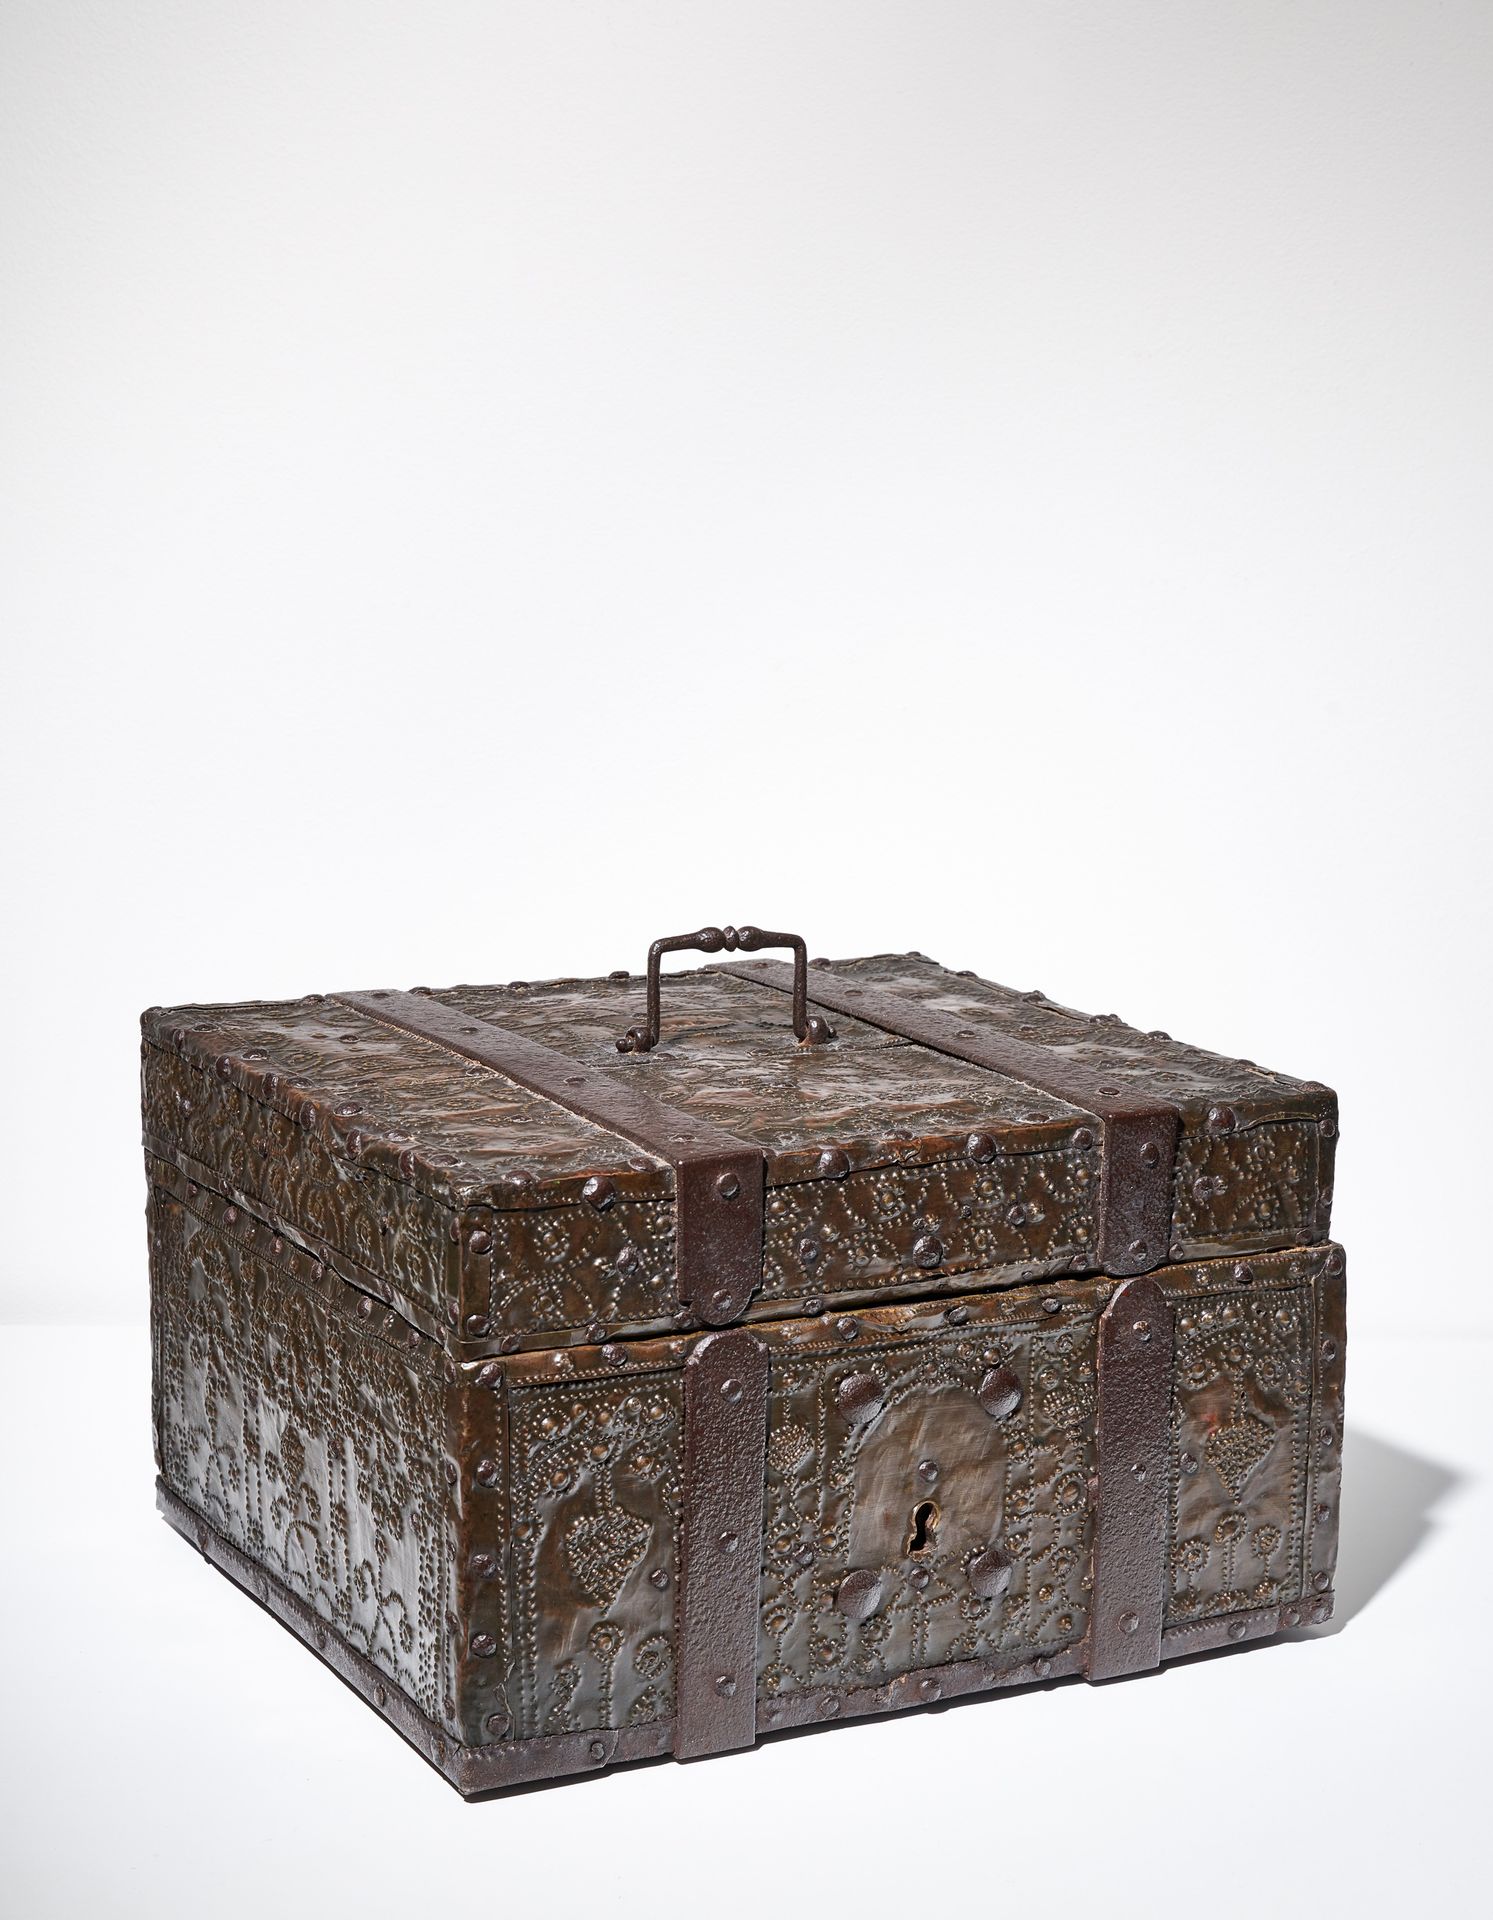 Null COPPER CASKET

Germany, 1748

The wooden structure covered with hammered co&hellip;